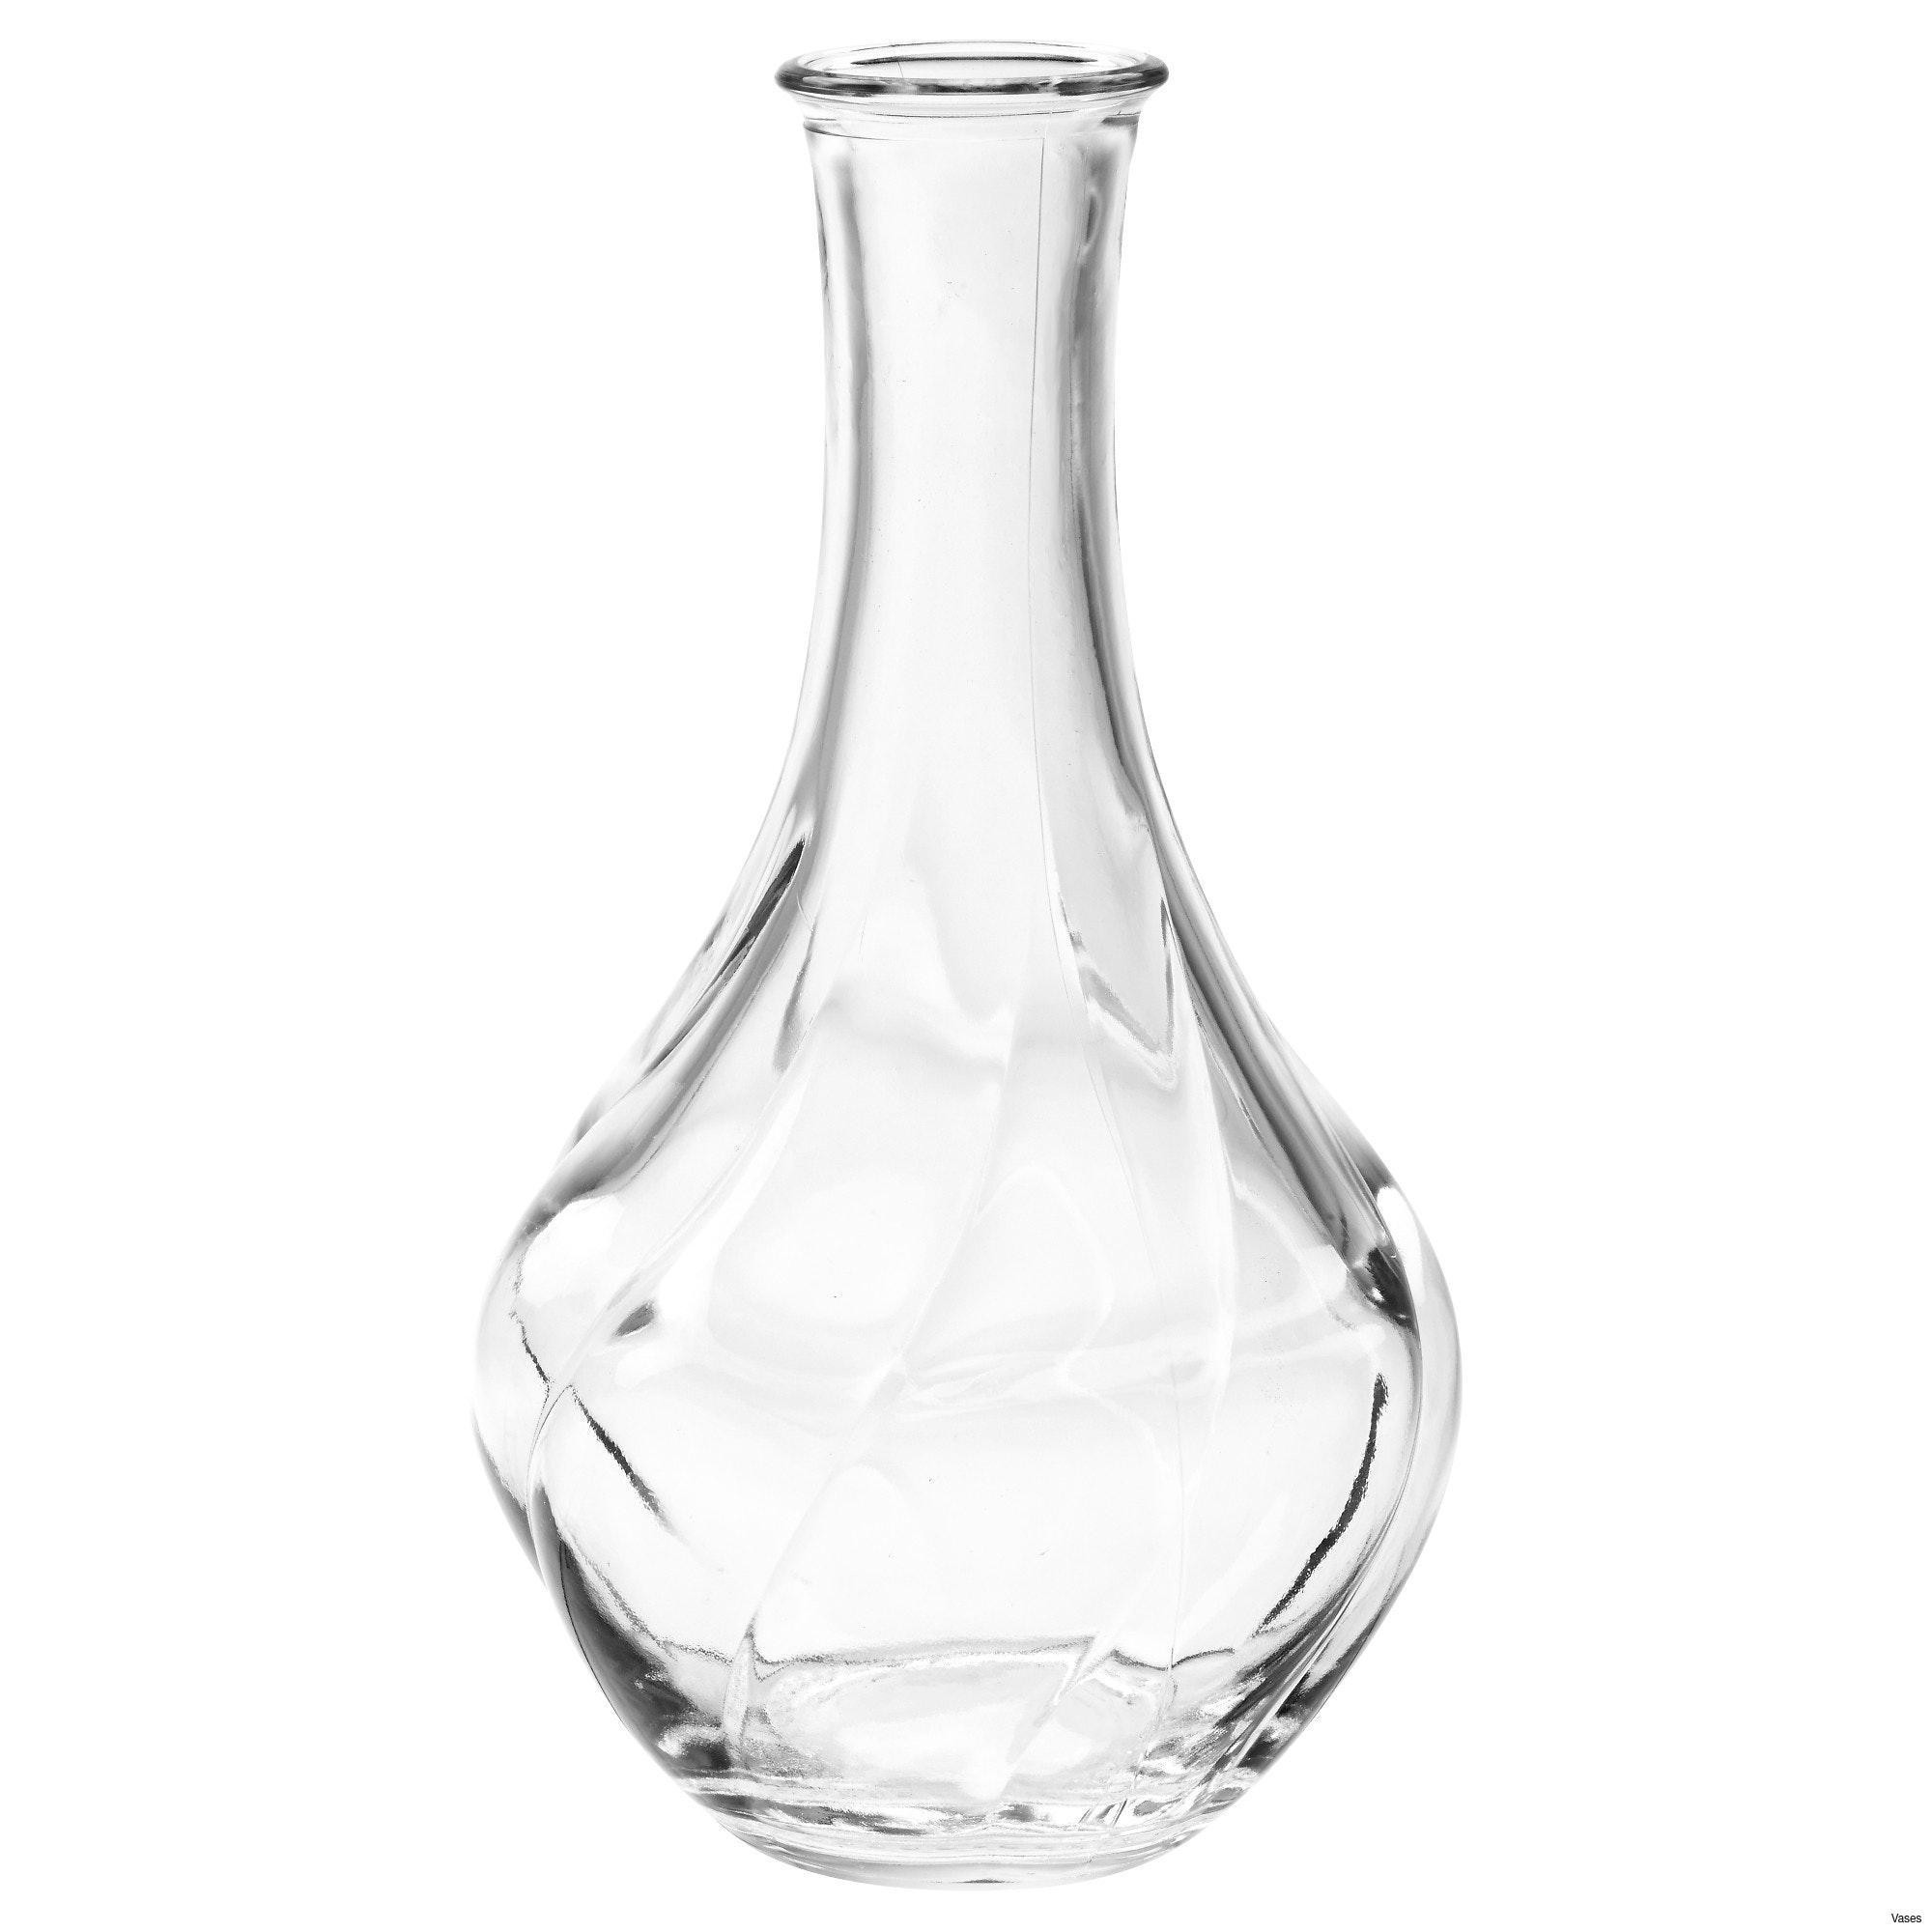 16 Fantastic White Mason Jar Vase 2024 free download white mason jar vase of large white vases image a large ming style blue and white vase br inside large white vases photos living room glass vases fresh clear vase 0d tags amazing and of